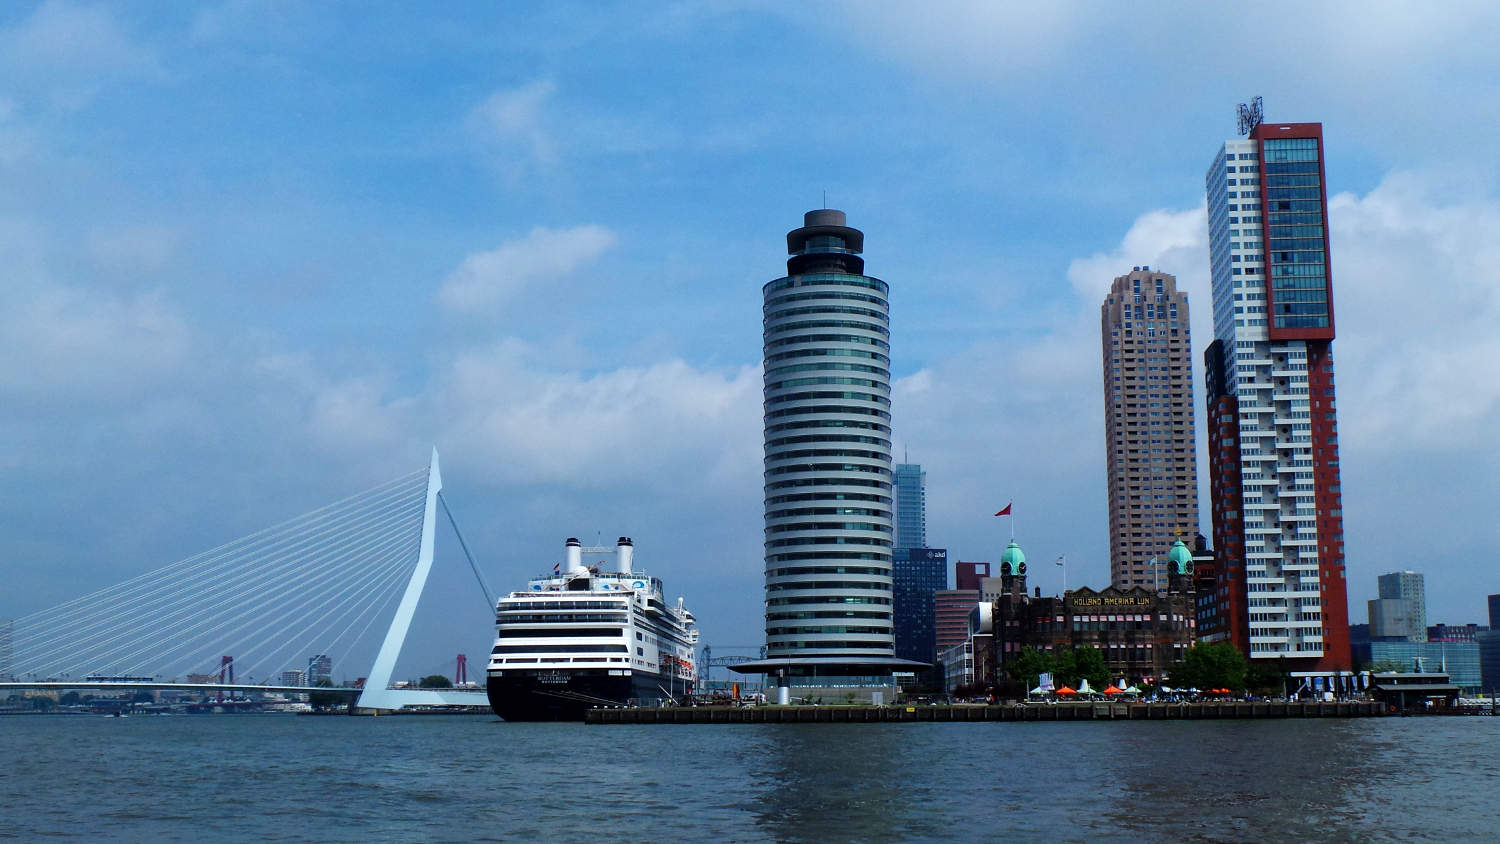 Rotterdam seen from the boat